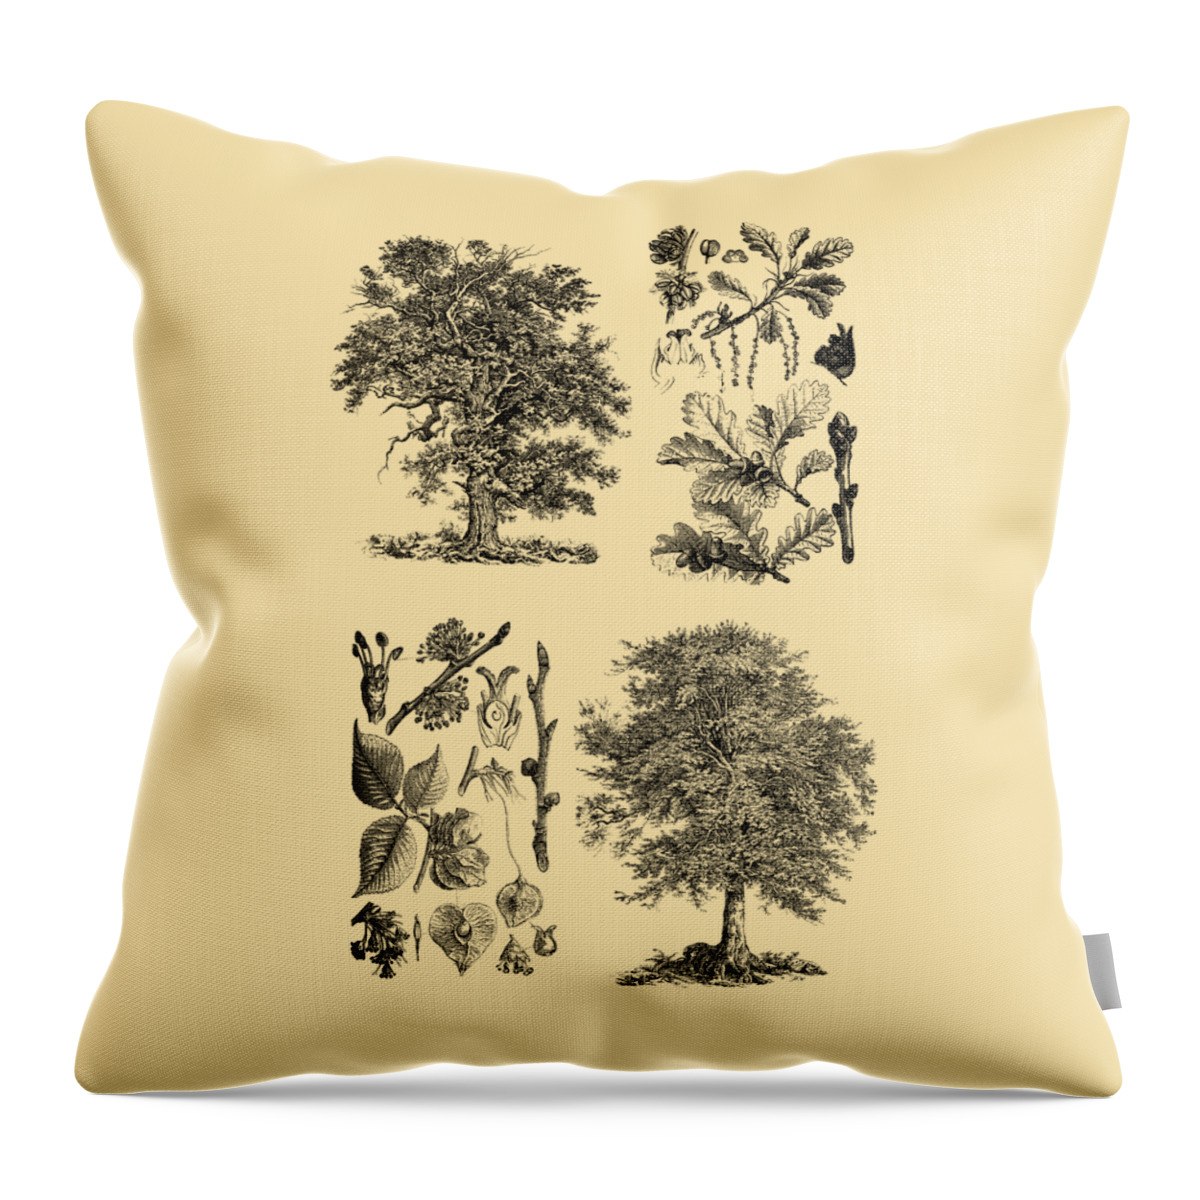 Tree Throw Pillow featuring the digital art Tree Diagram by Madame Memento